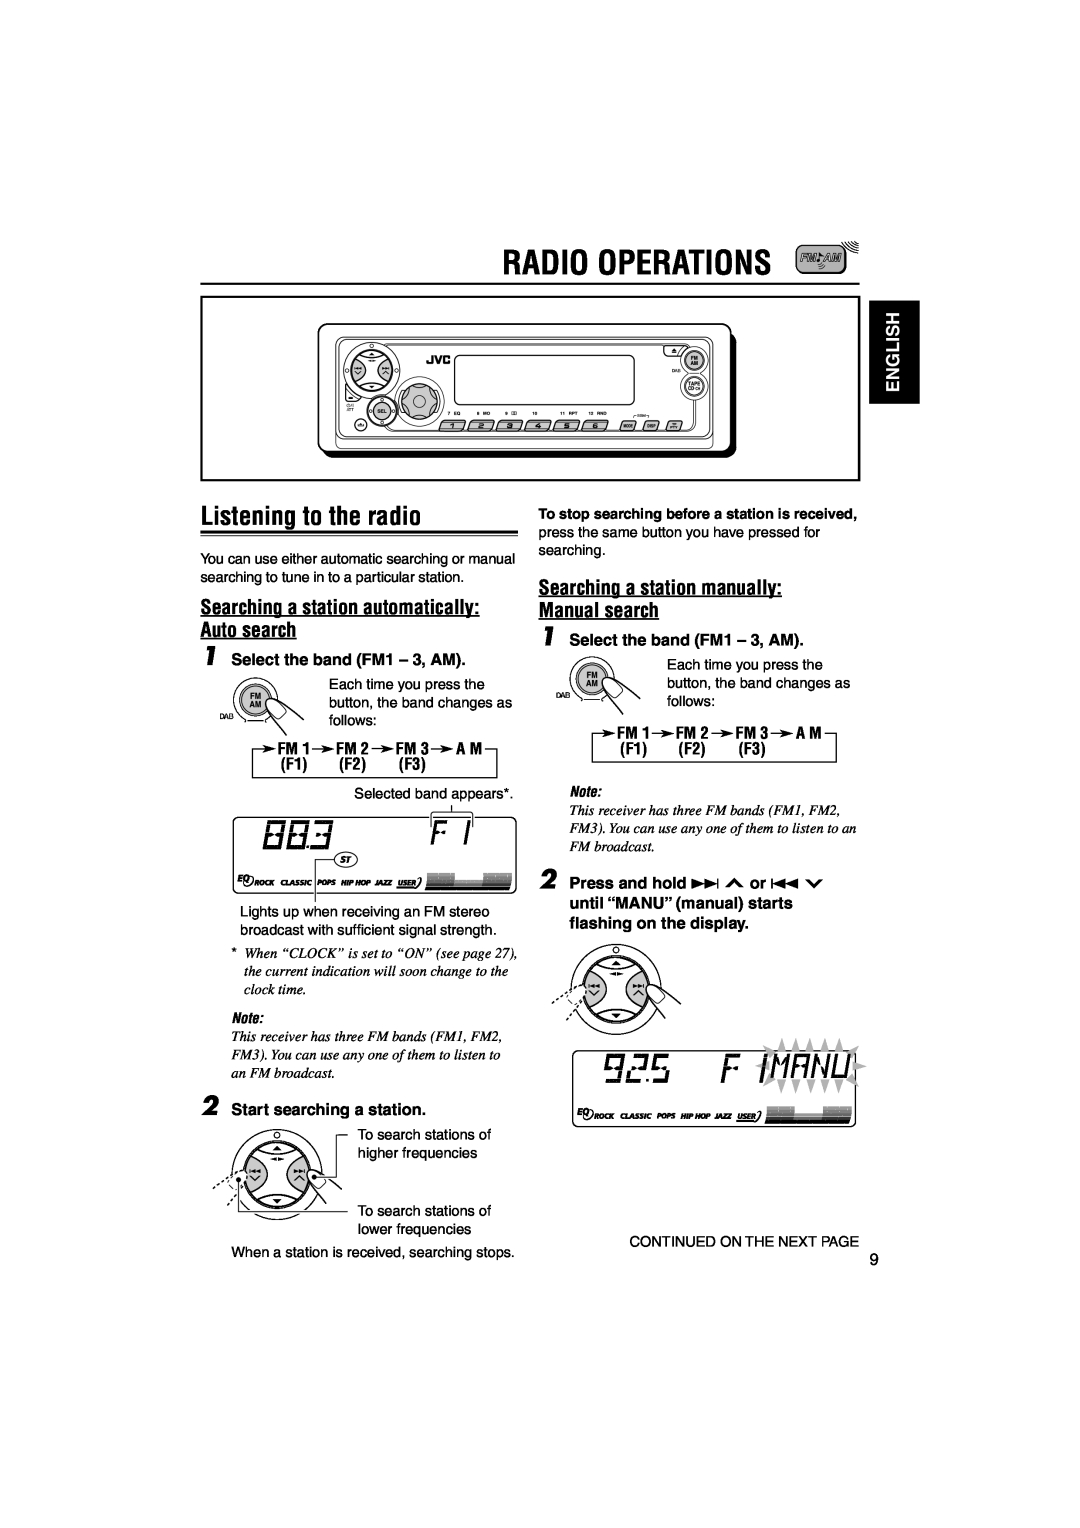 JVC KS-FX942R manual Radio Operations, Listening to the radio, Searching a station automatically Auto search, English 